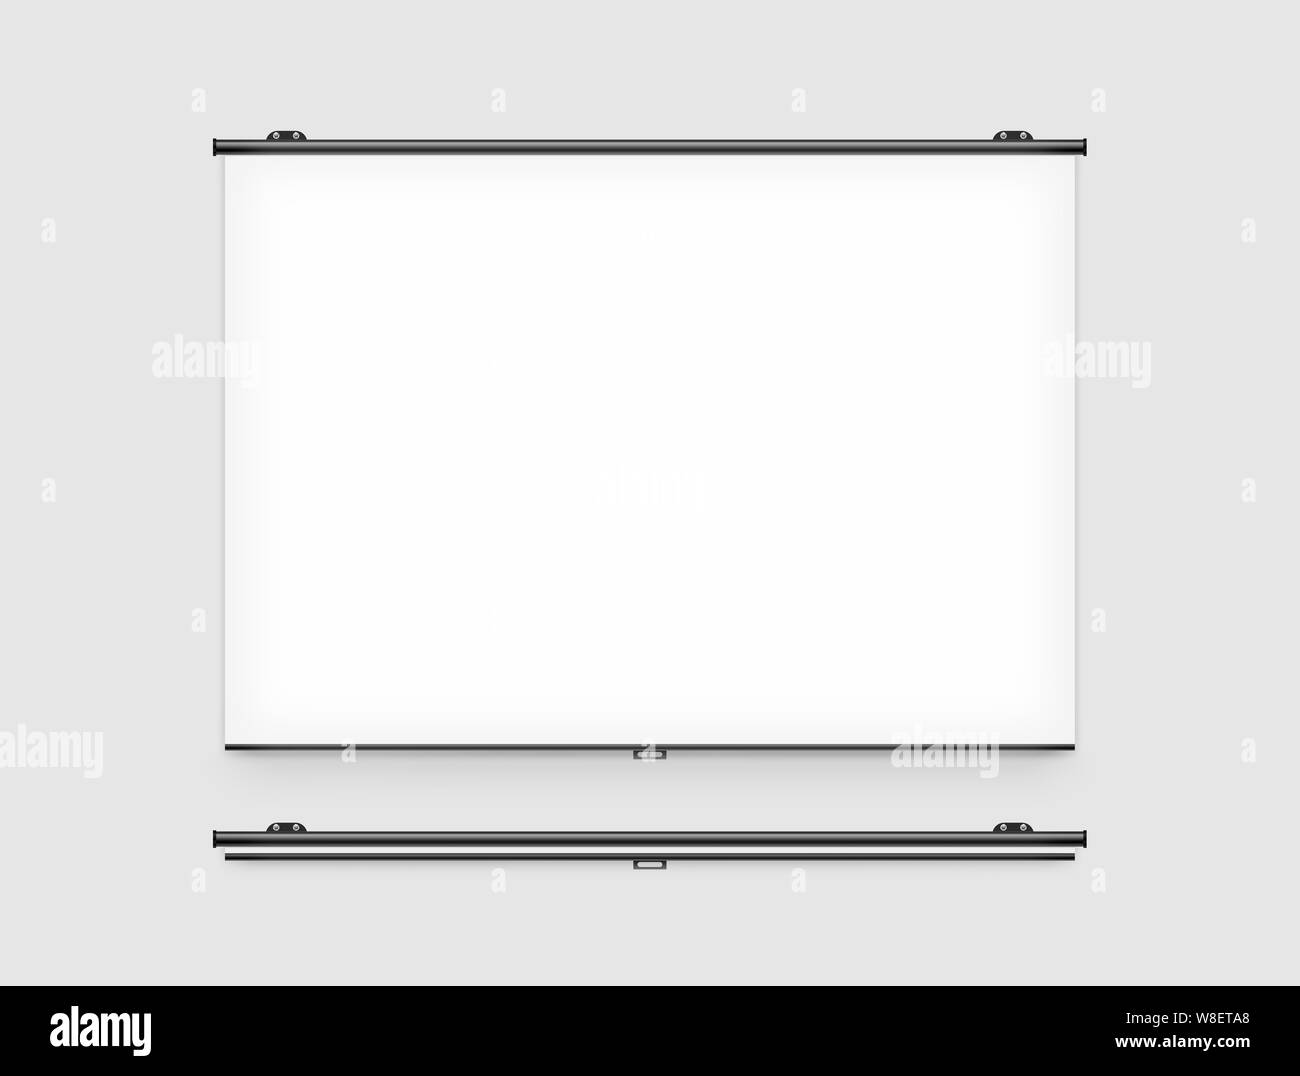 Blank projector screen mockup on the wall. Projector display mock up. Projection presentation clear monitor on wall. Slide show front design. Slideshow billboard banner frame. Projection background. Stock Photo